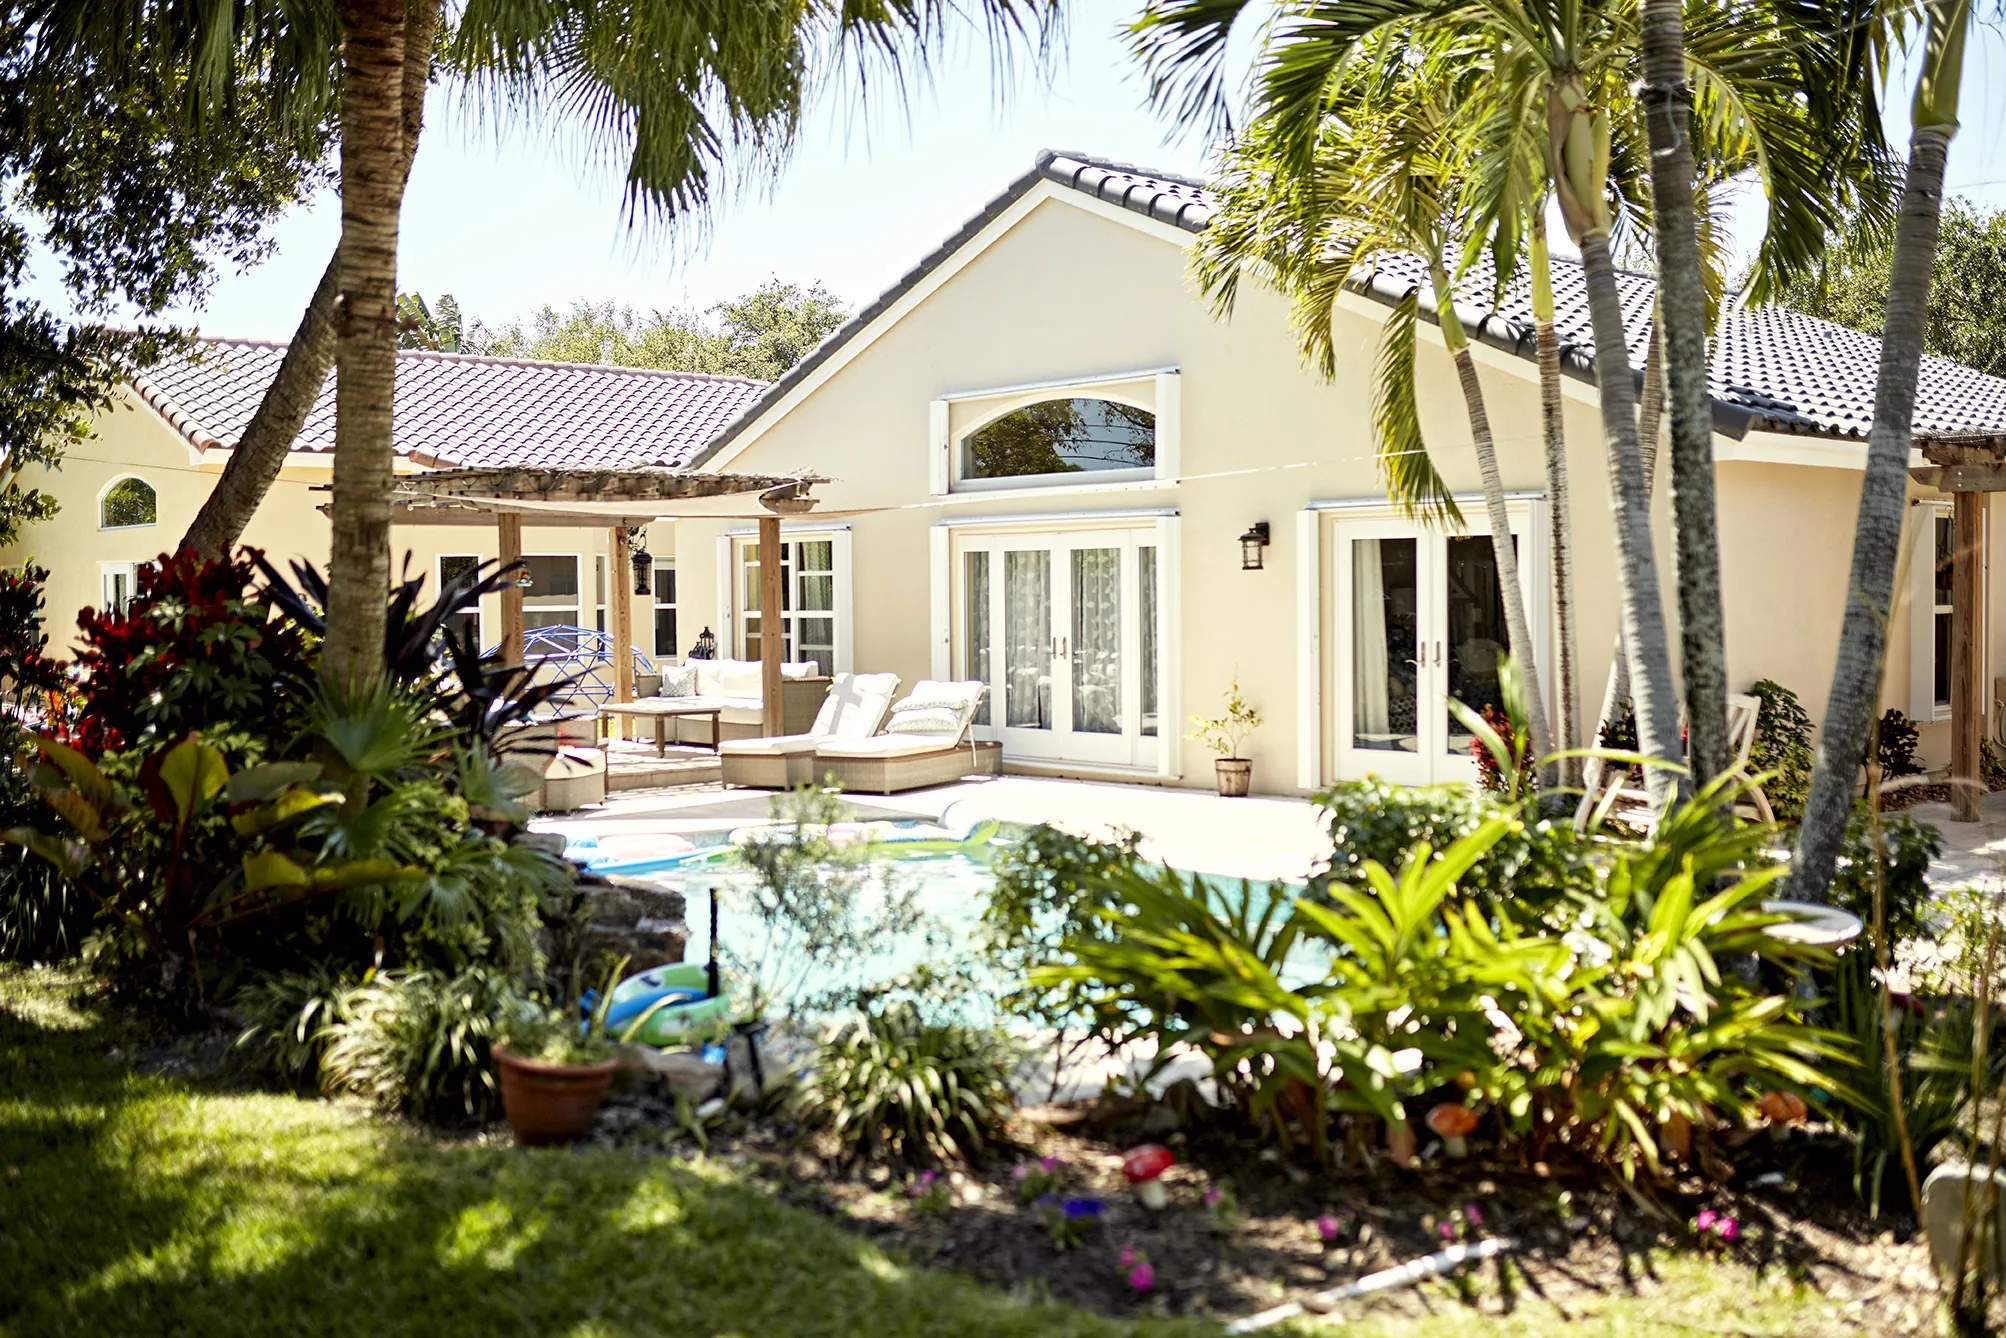 serene backyard of a family home in Florida with palm trees, beautiful landscaping and a small pool